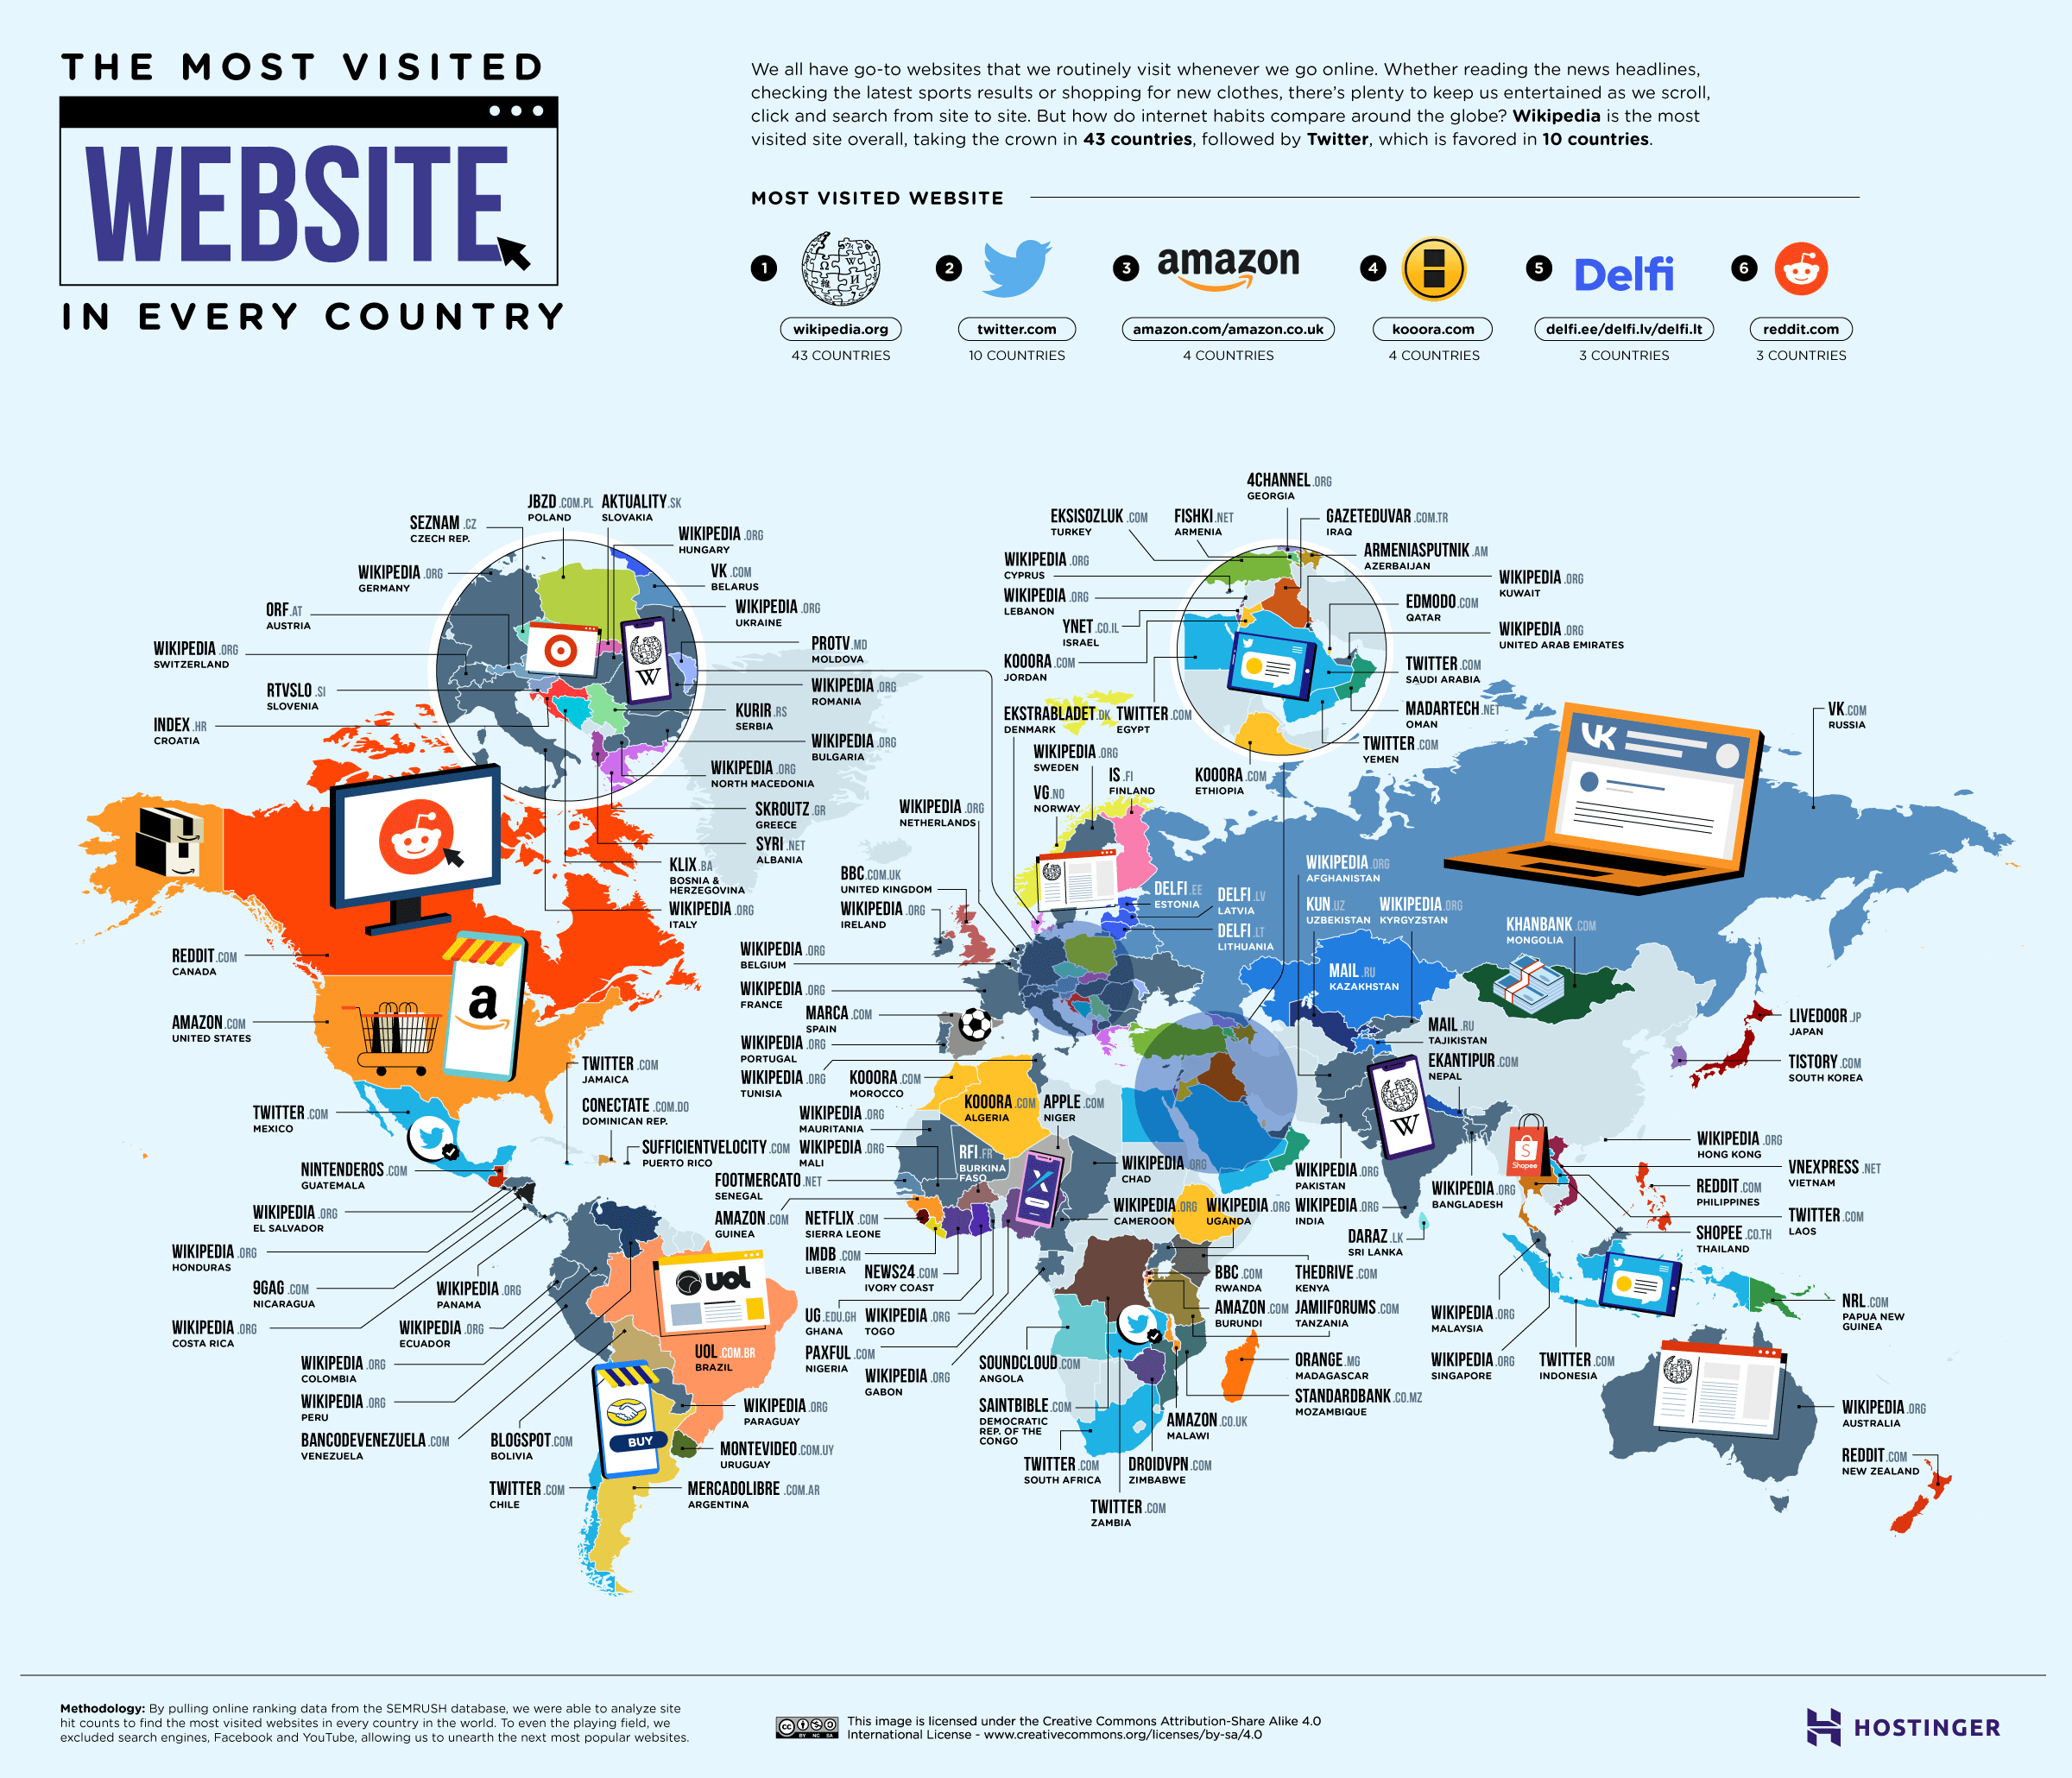 Most Website Every Country (That Isn't A Search Engine)